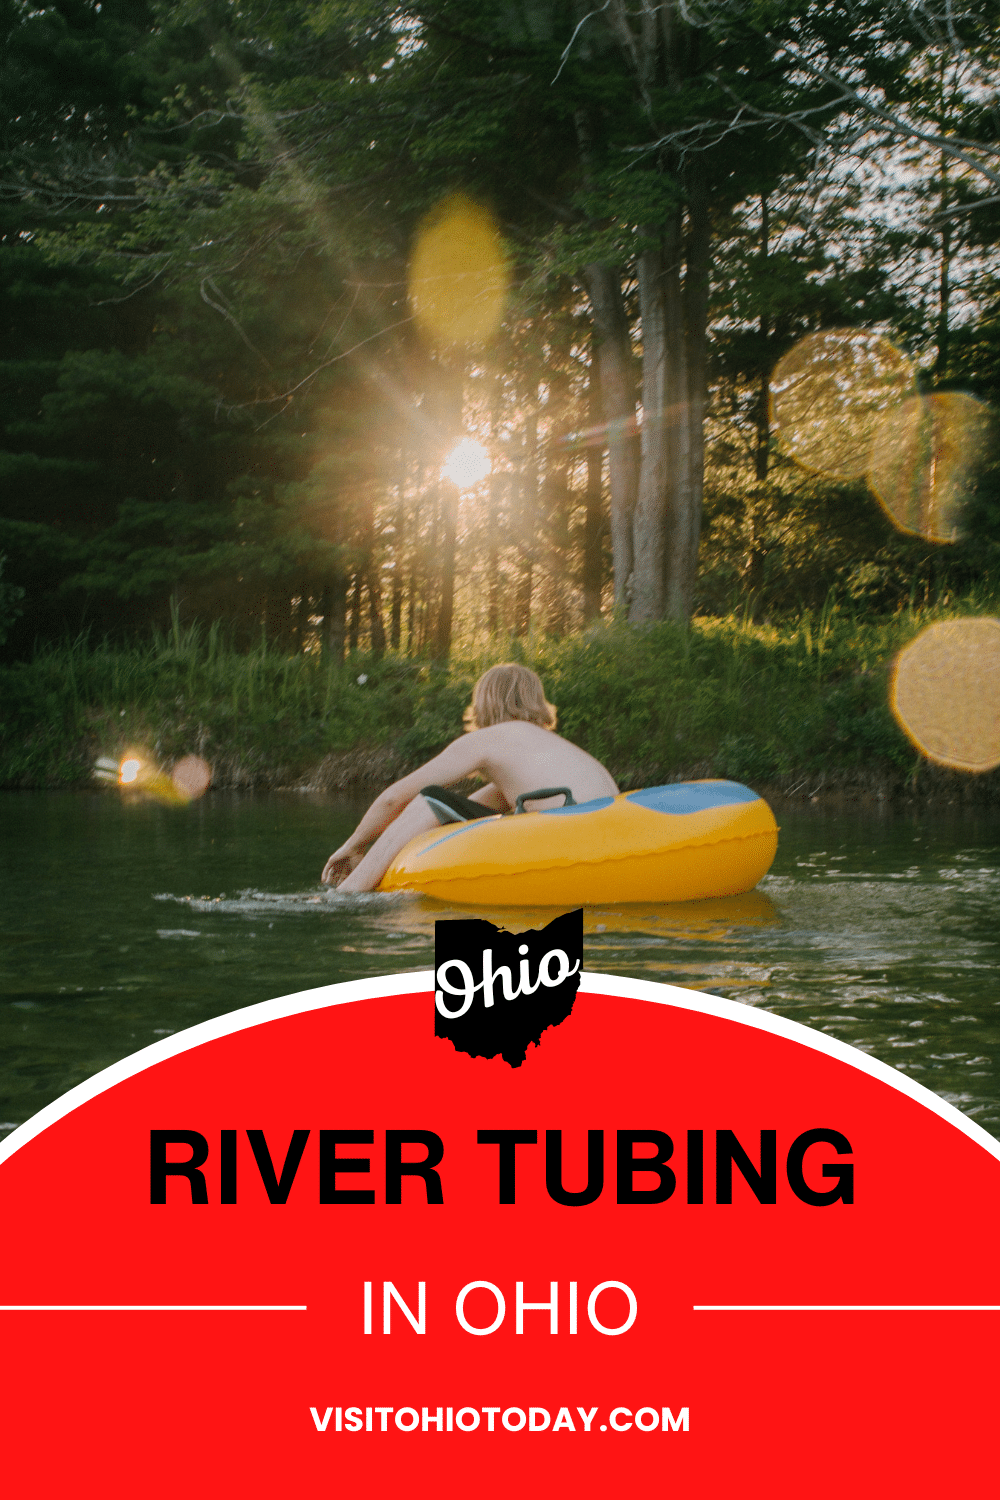 Looking for a fun way to beat the summer heat? 🌞 River tubing in Ohio is your answer! Whether you’re an adventure seeker or just want to relax and float down a scenic river. From the calm waters of the Little Miami River to the adventurous Hocking Hills, there’s a perfect spot for everyone. Grab your friends, pack some snacks, and don’t forget the sunscreen. 🏖️ Check out the best spots and tips for an amazing tubing experience! #OhioAdventures #RiverTubing #SummerFun #VisitOhio